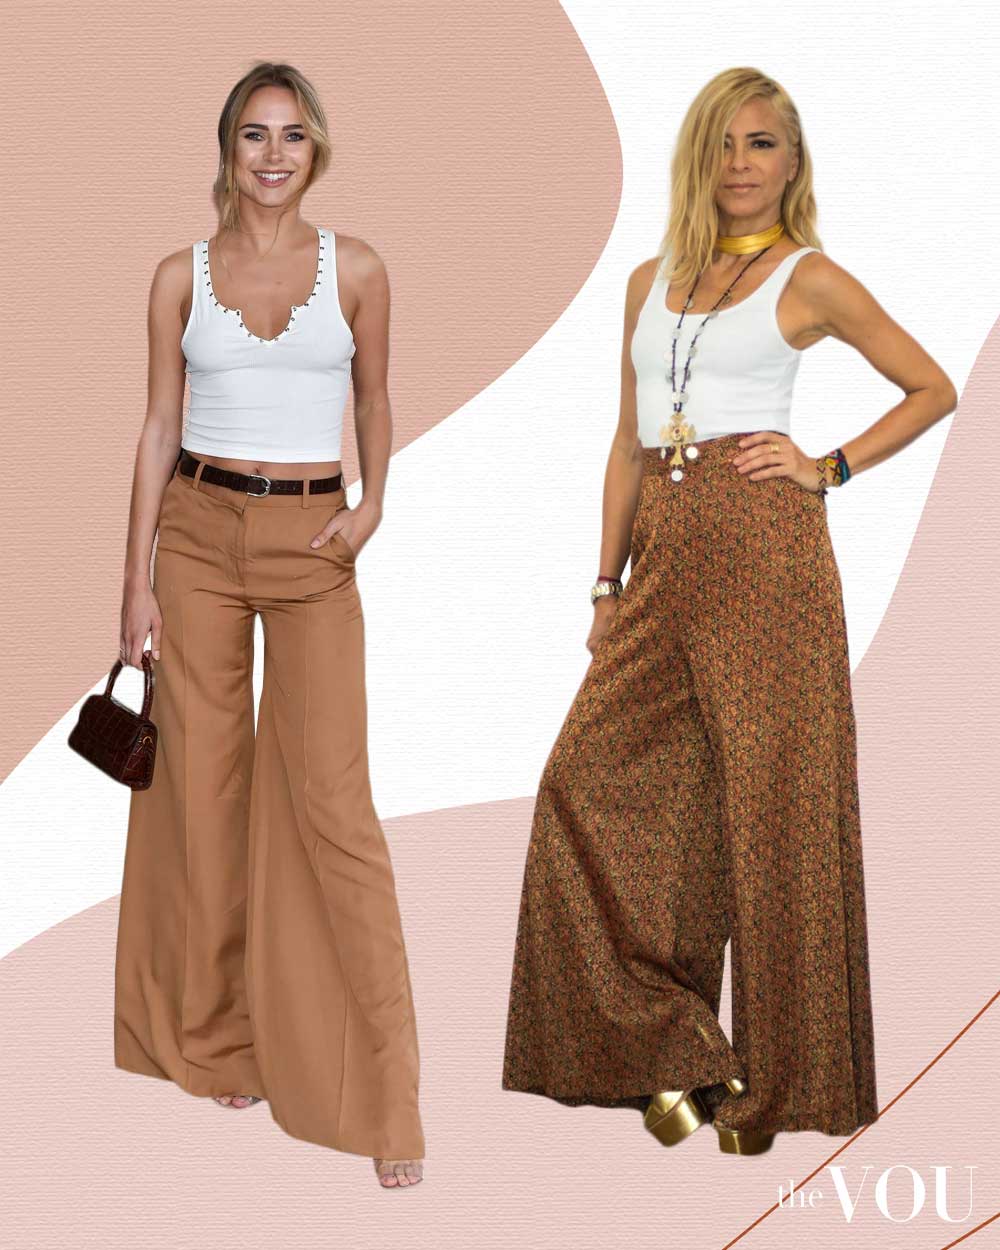 Brown Wide Leg Pants With White Tanks Minimalist Style Outfits